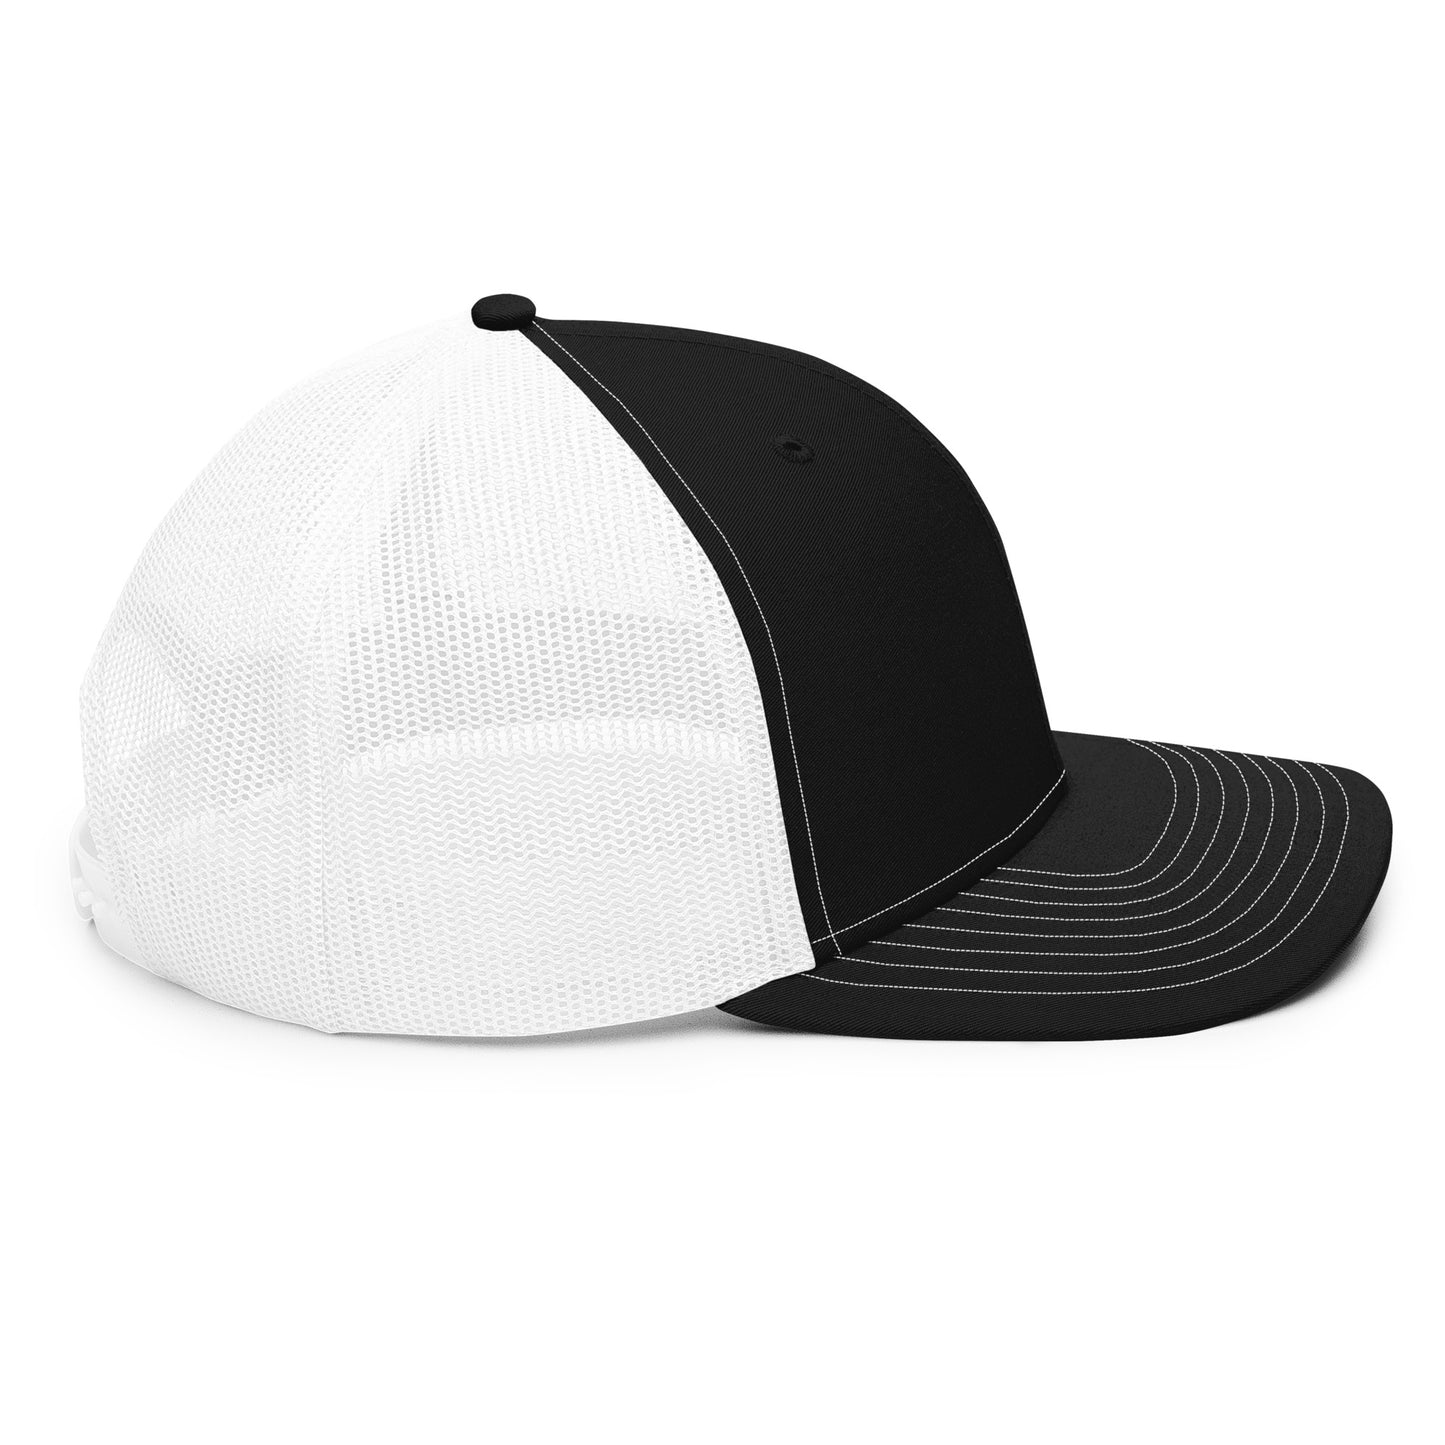 a black and white hat on a white background